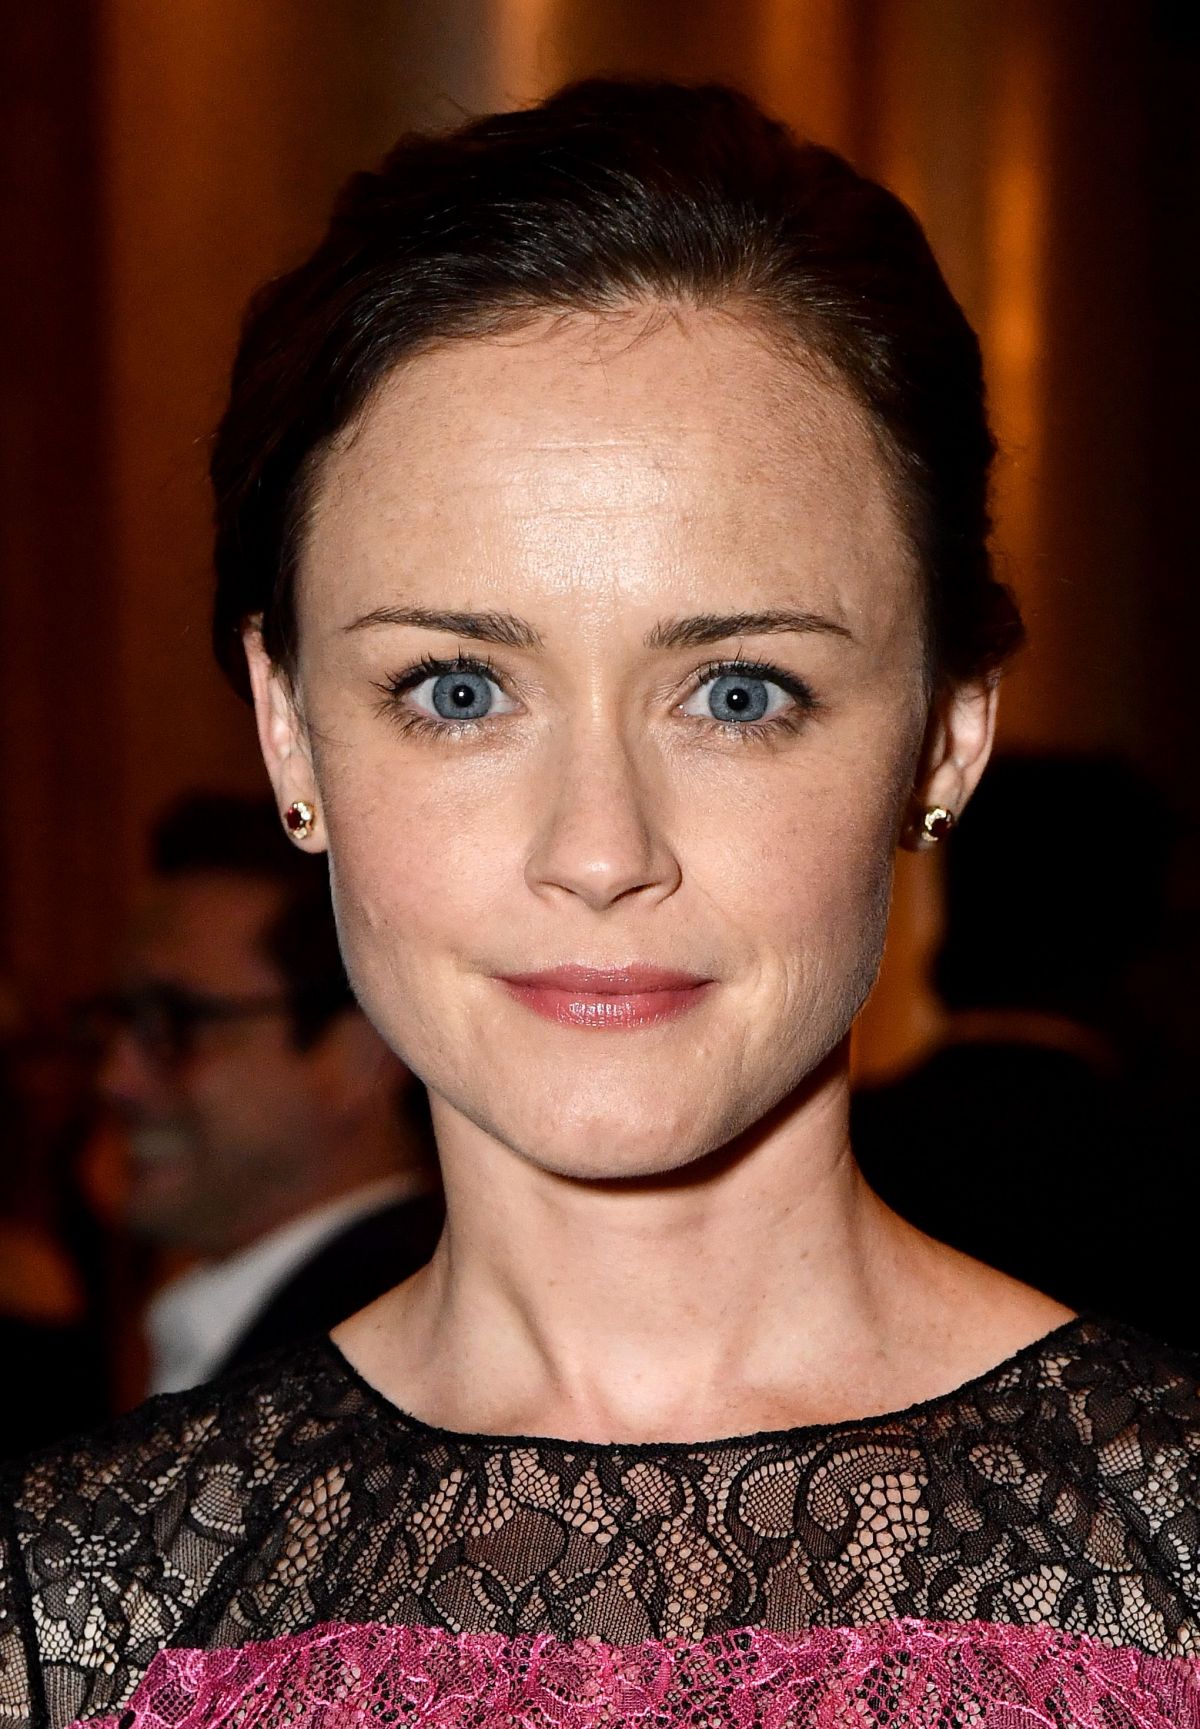 alexis-bledel-at-33rd-annual-television-critics-association-awards-in-beverly-hills-08-05-2017_2.jpg